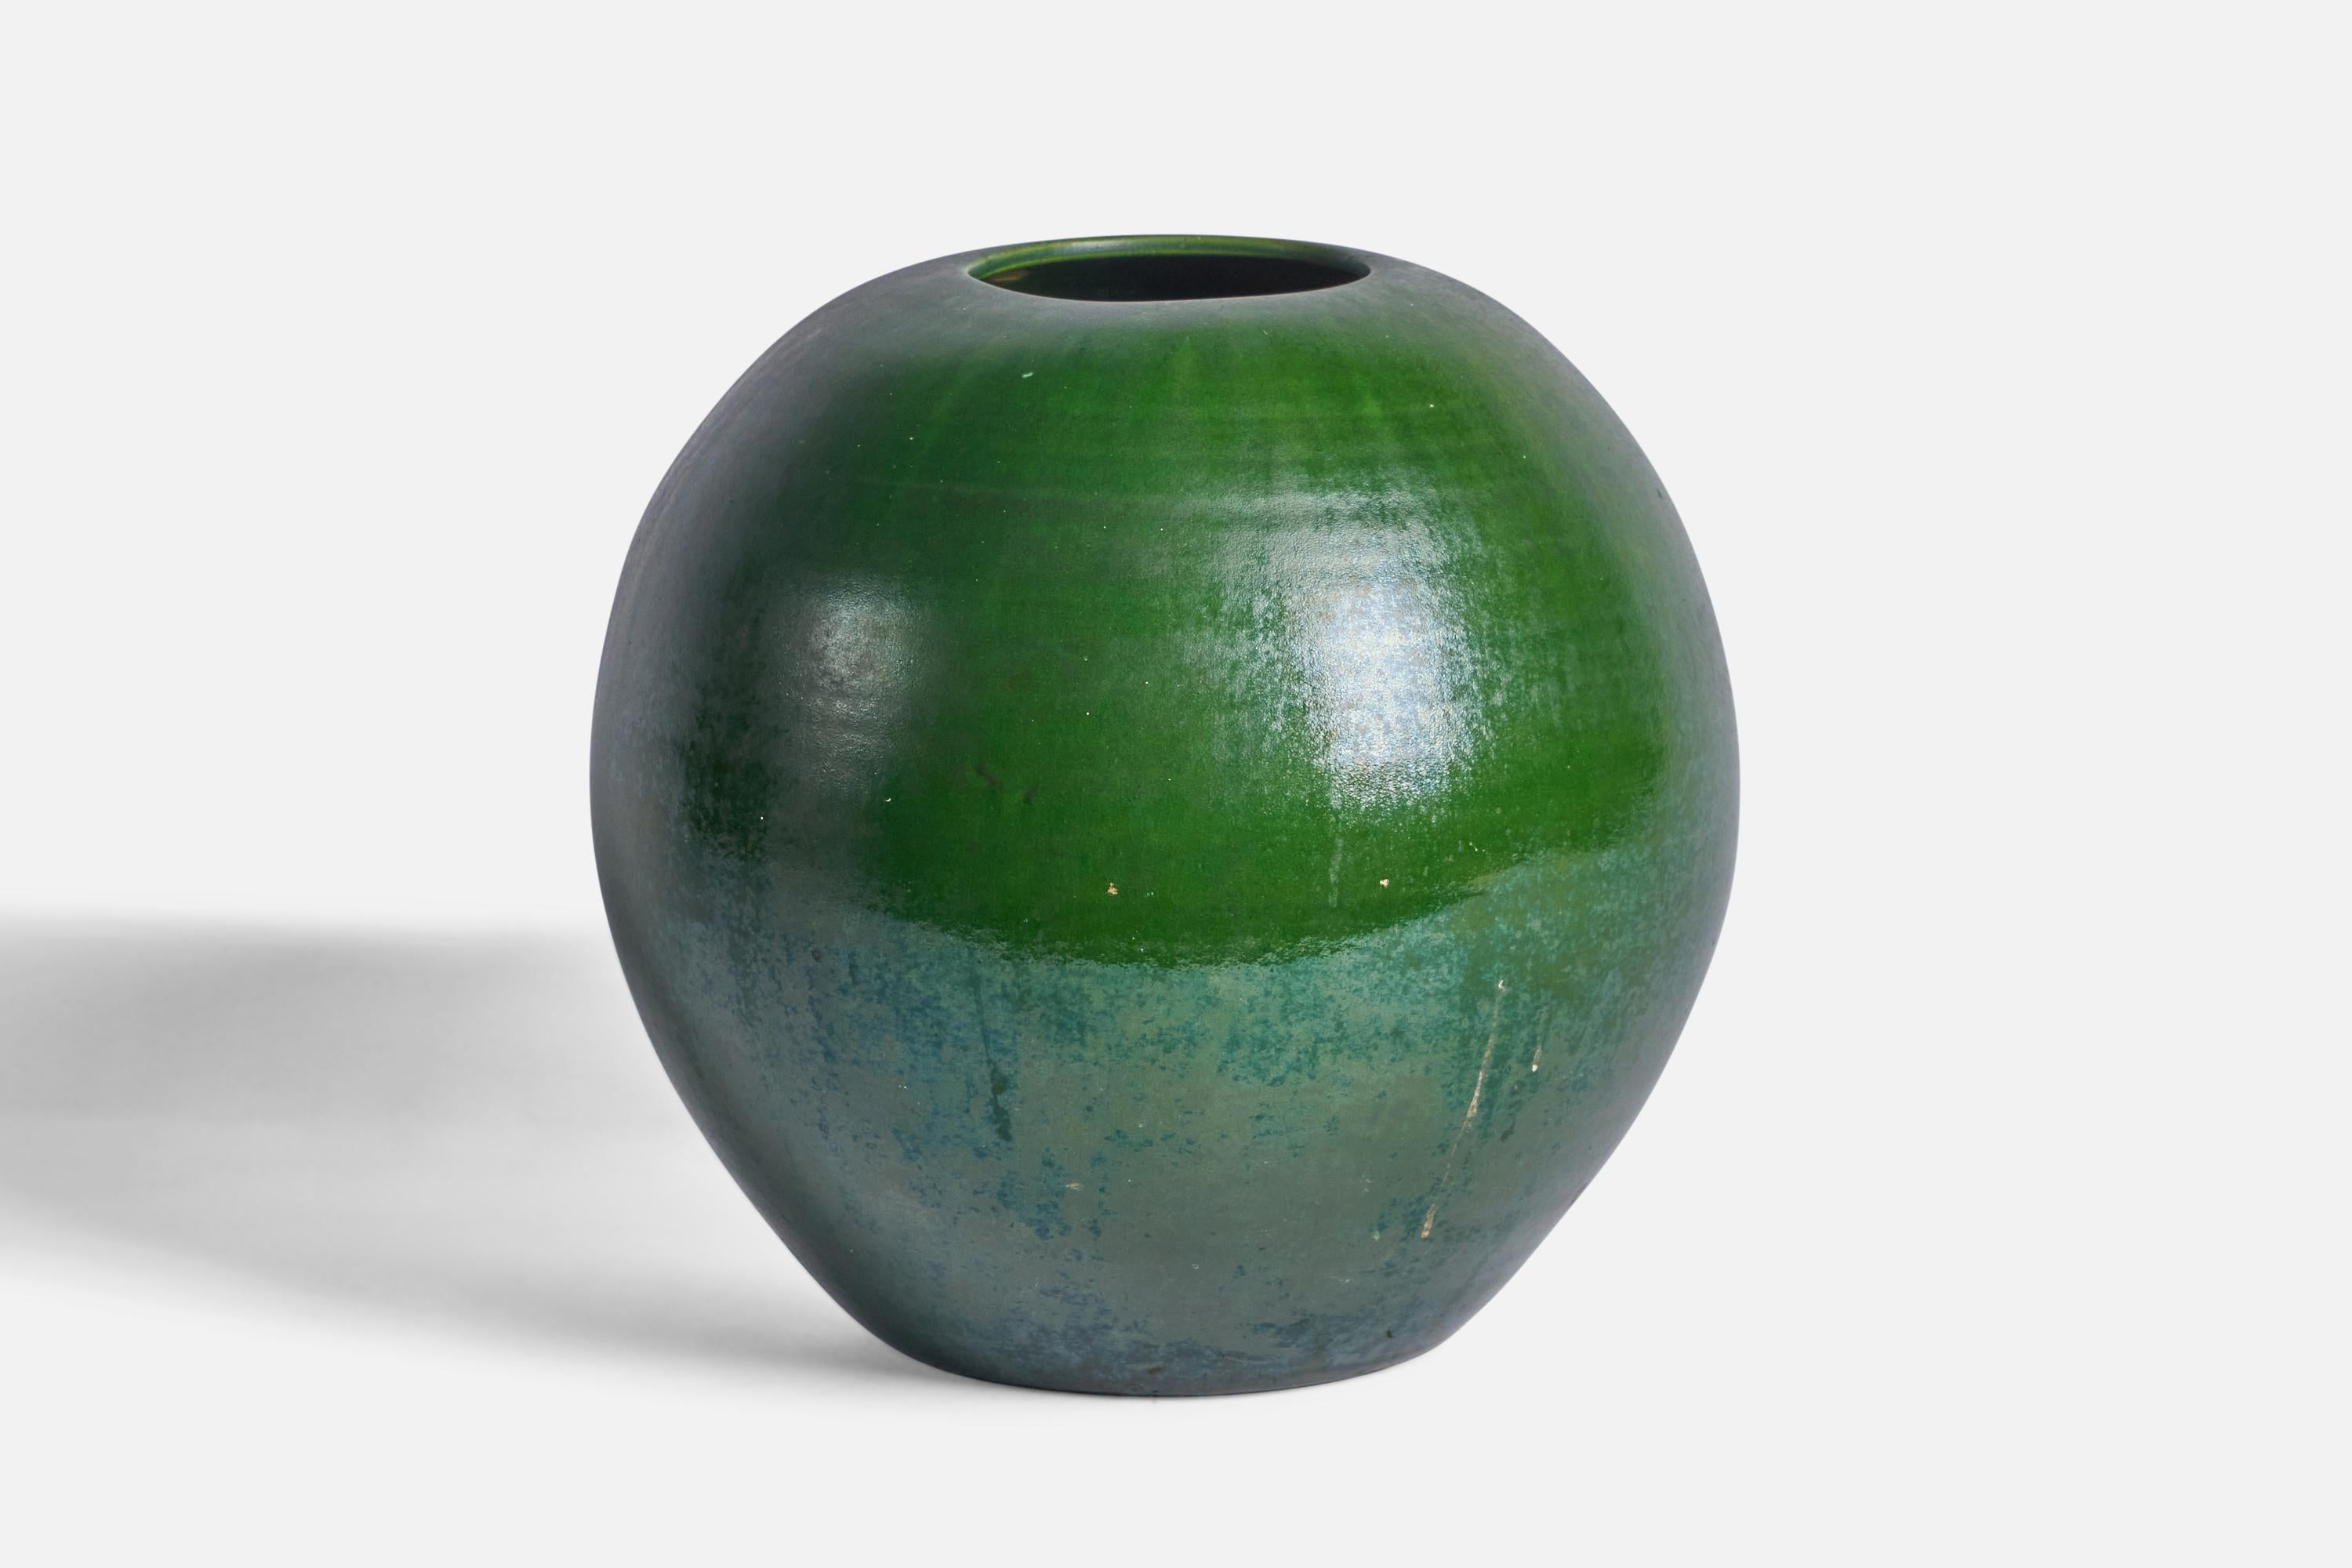 A sizeable green-glazed earthenware vase designed and produced by Herman Kähler, Denmark, c. 1920s.